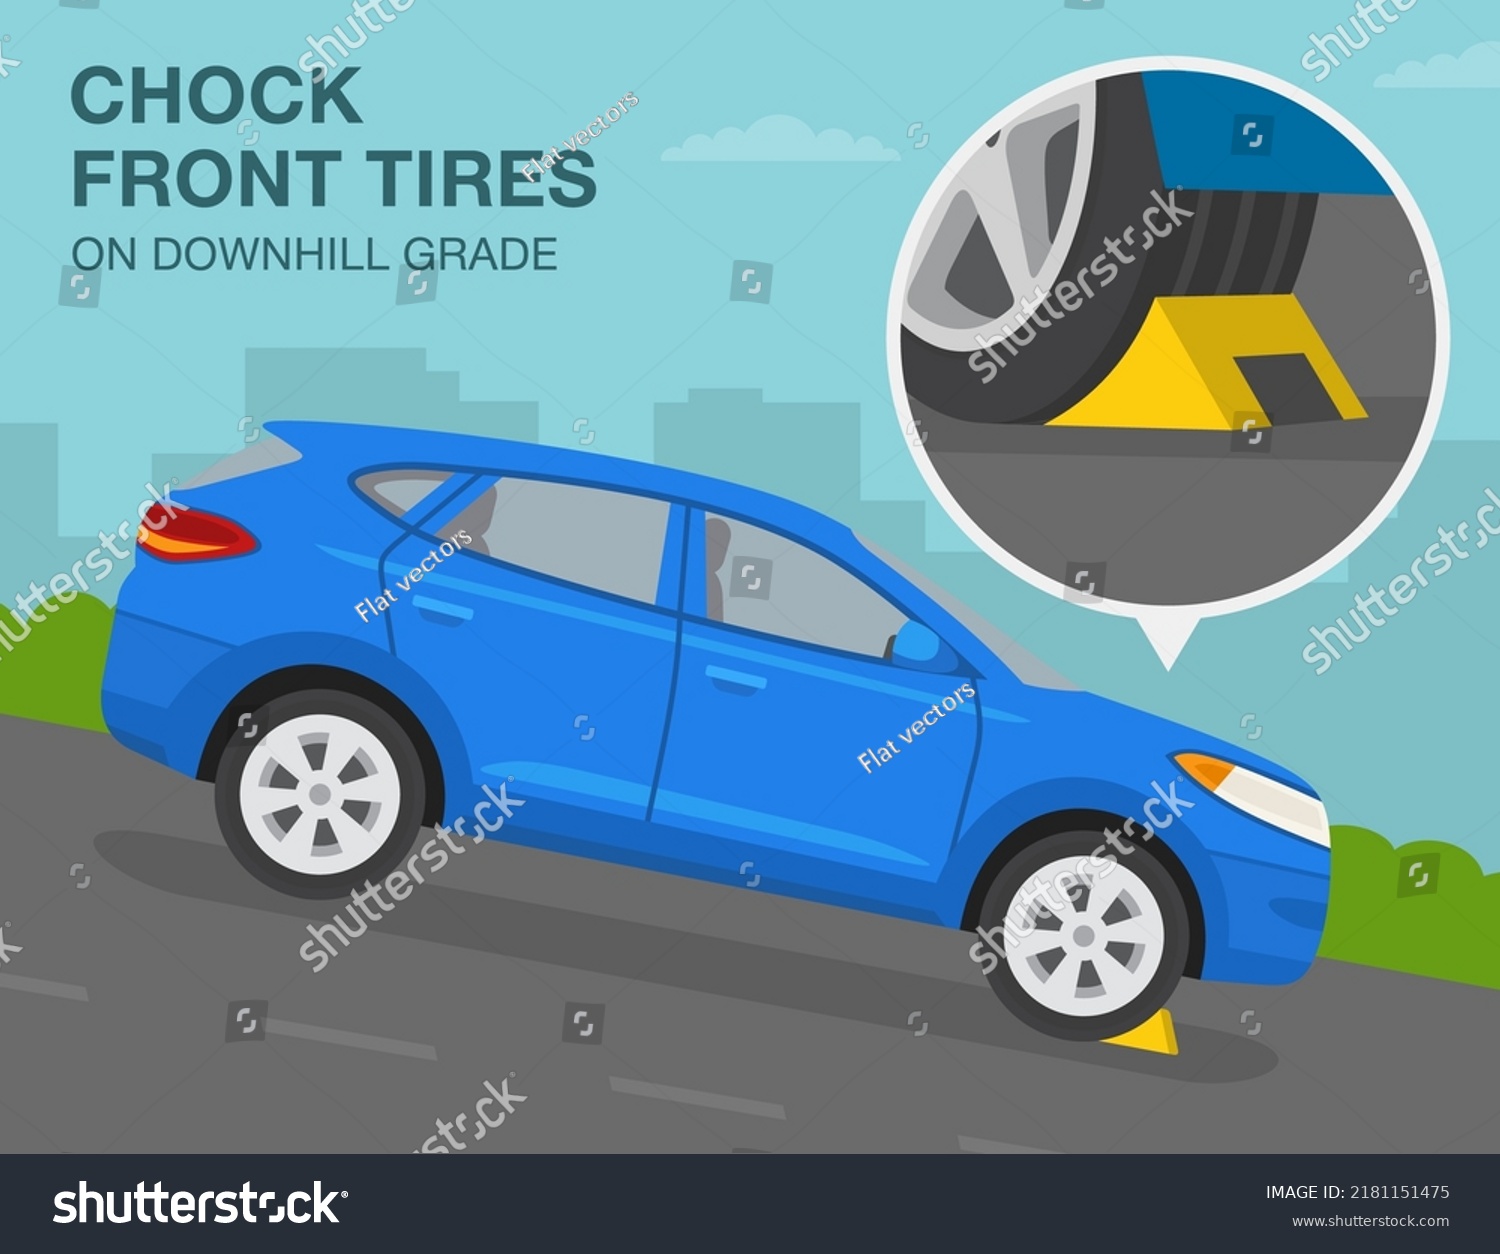 SVG of Safe driving rules and tips. Proper wheel chocking procedures. Correct wheel block placement on downhill grade. 